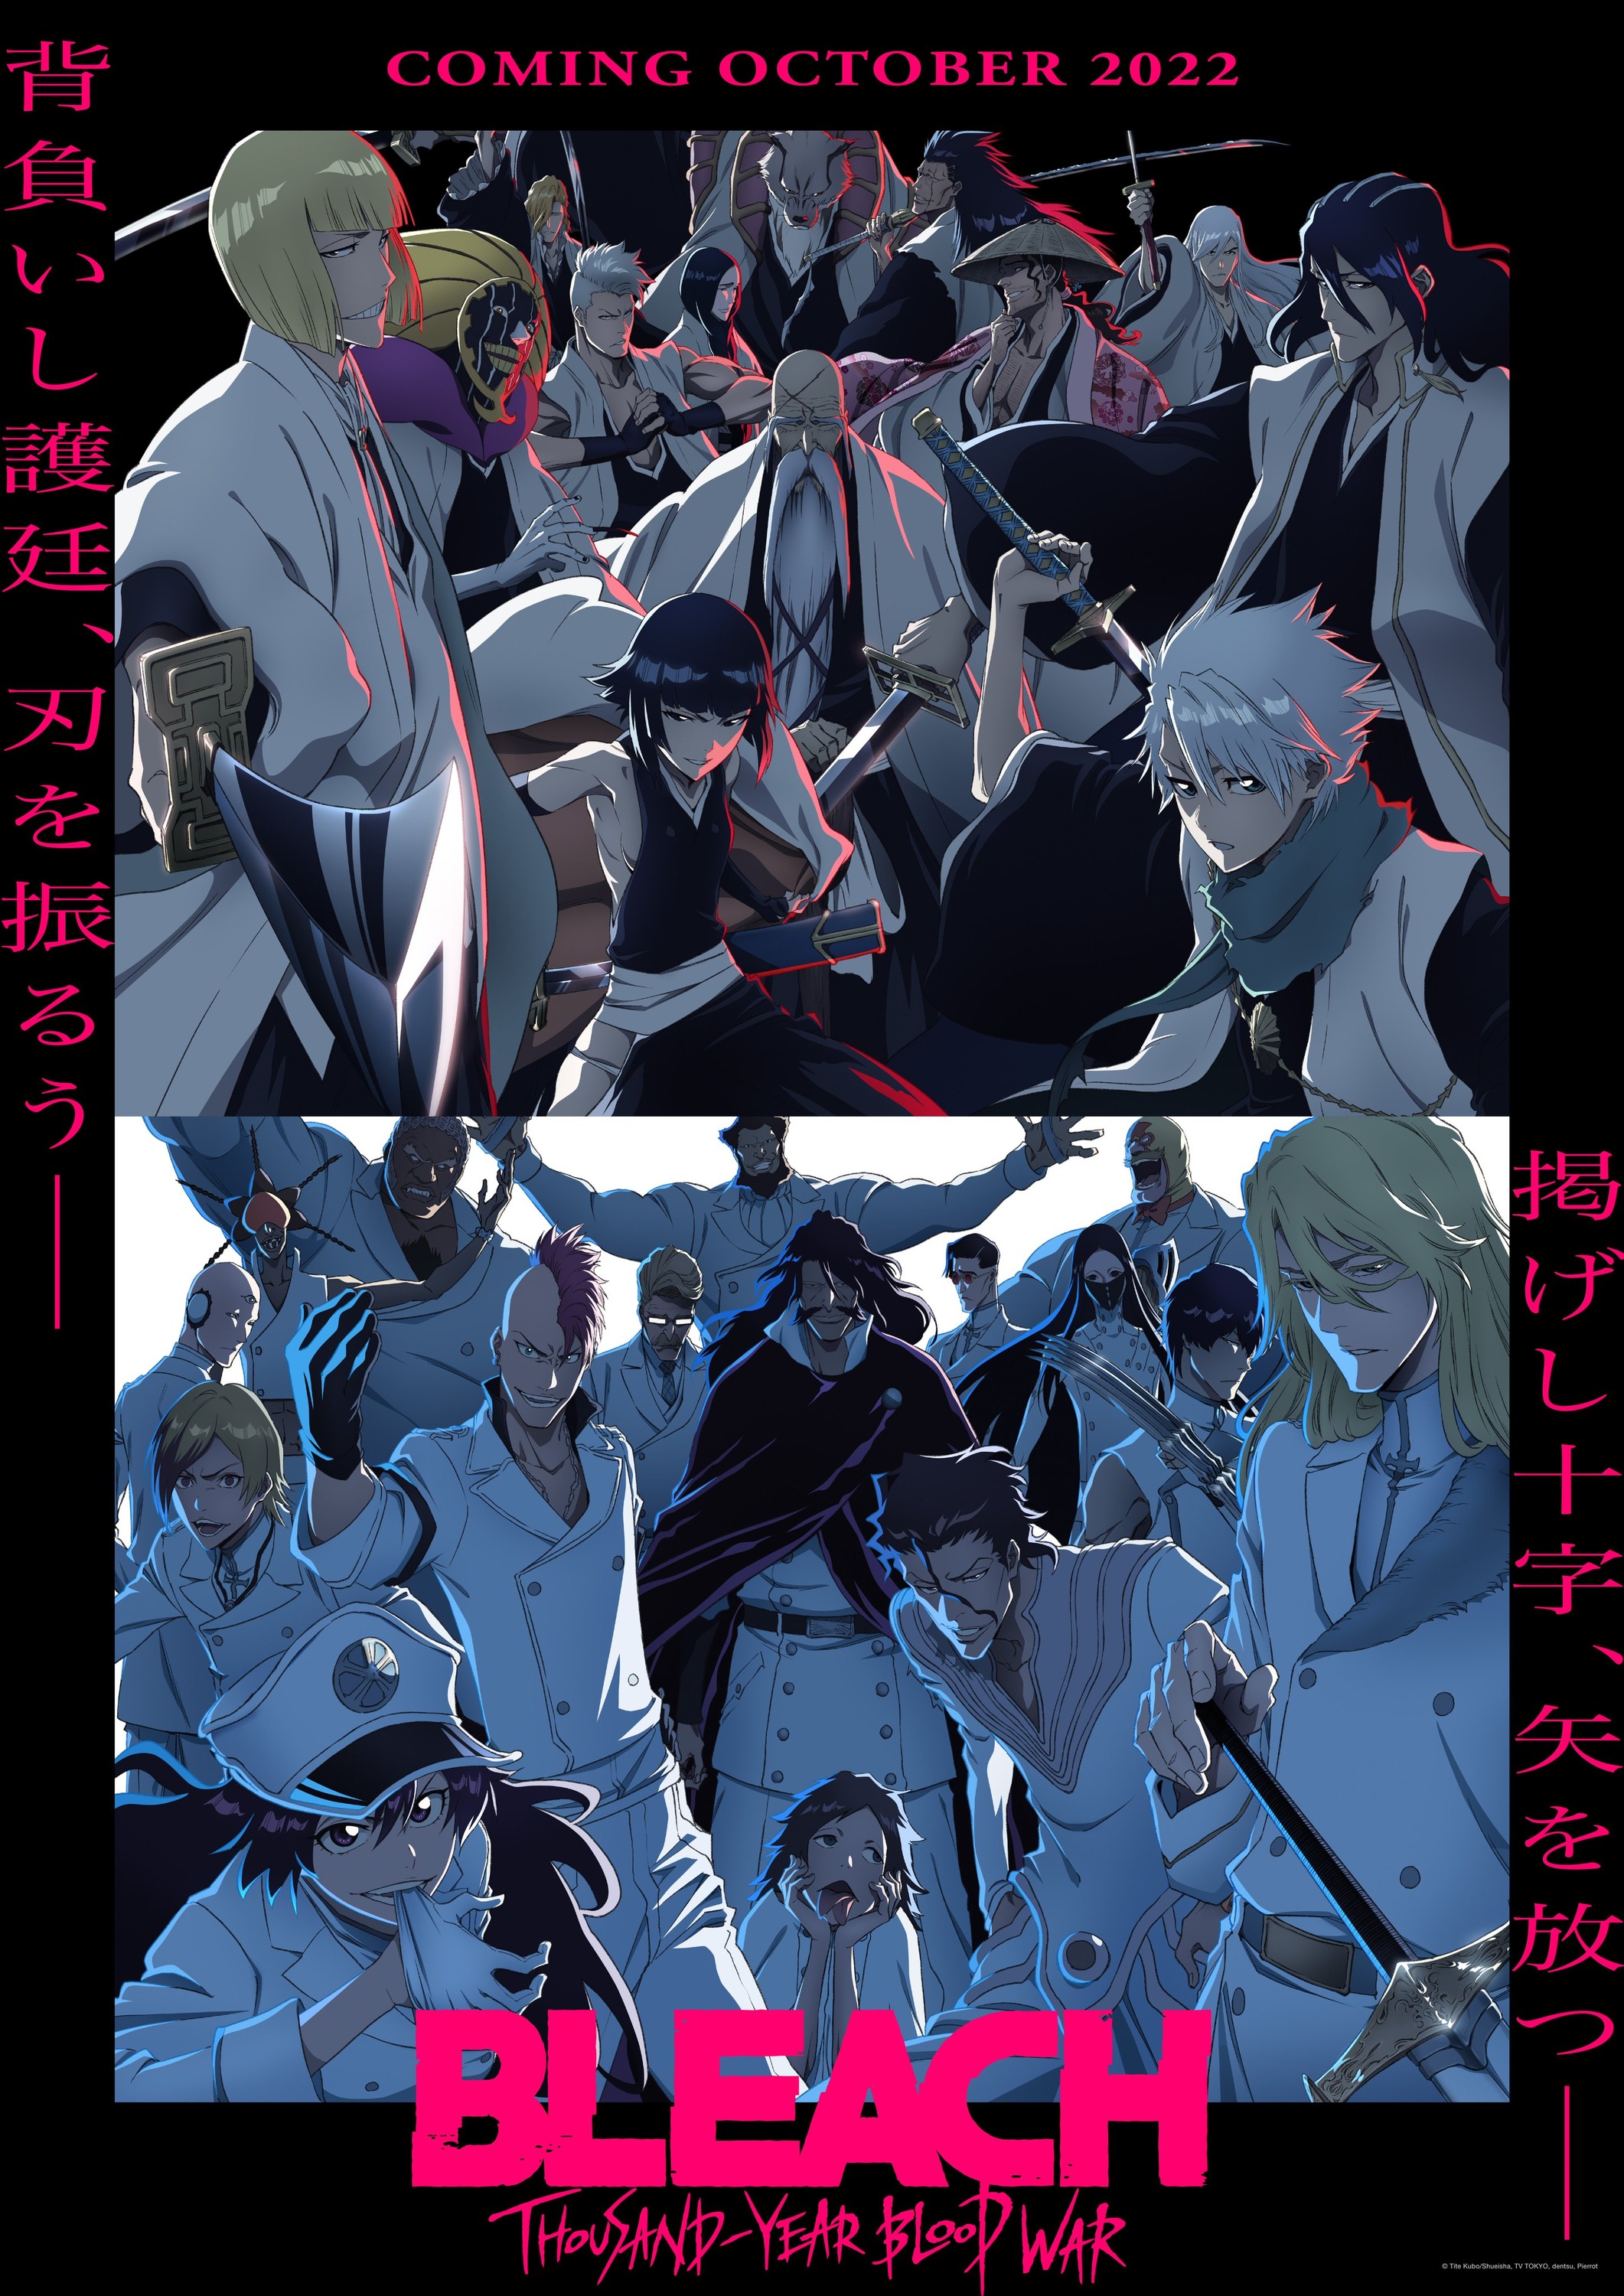 Mega Sized TV Poster Image for Bleach: Thousand Year Blood War (#2 of 7)